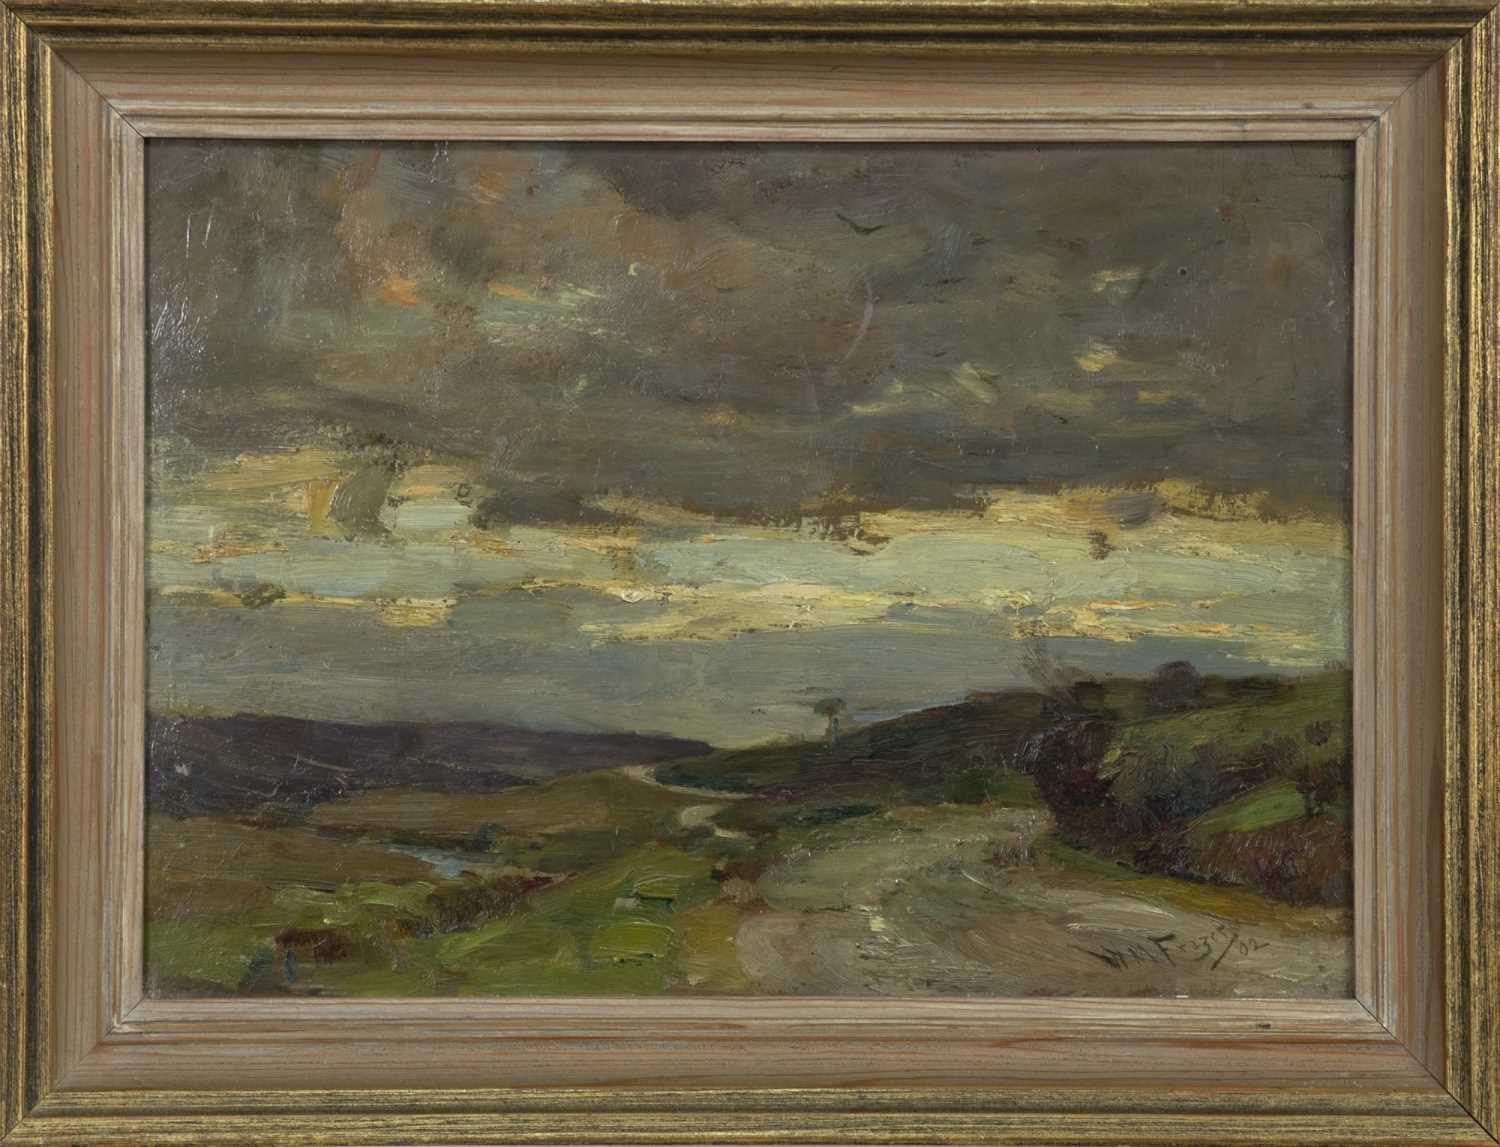 Lot 290 - STORMY SKIES, AN OIL BY WILLIAM MILLER FRAZER